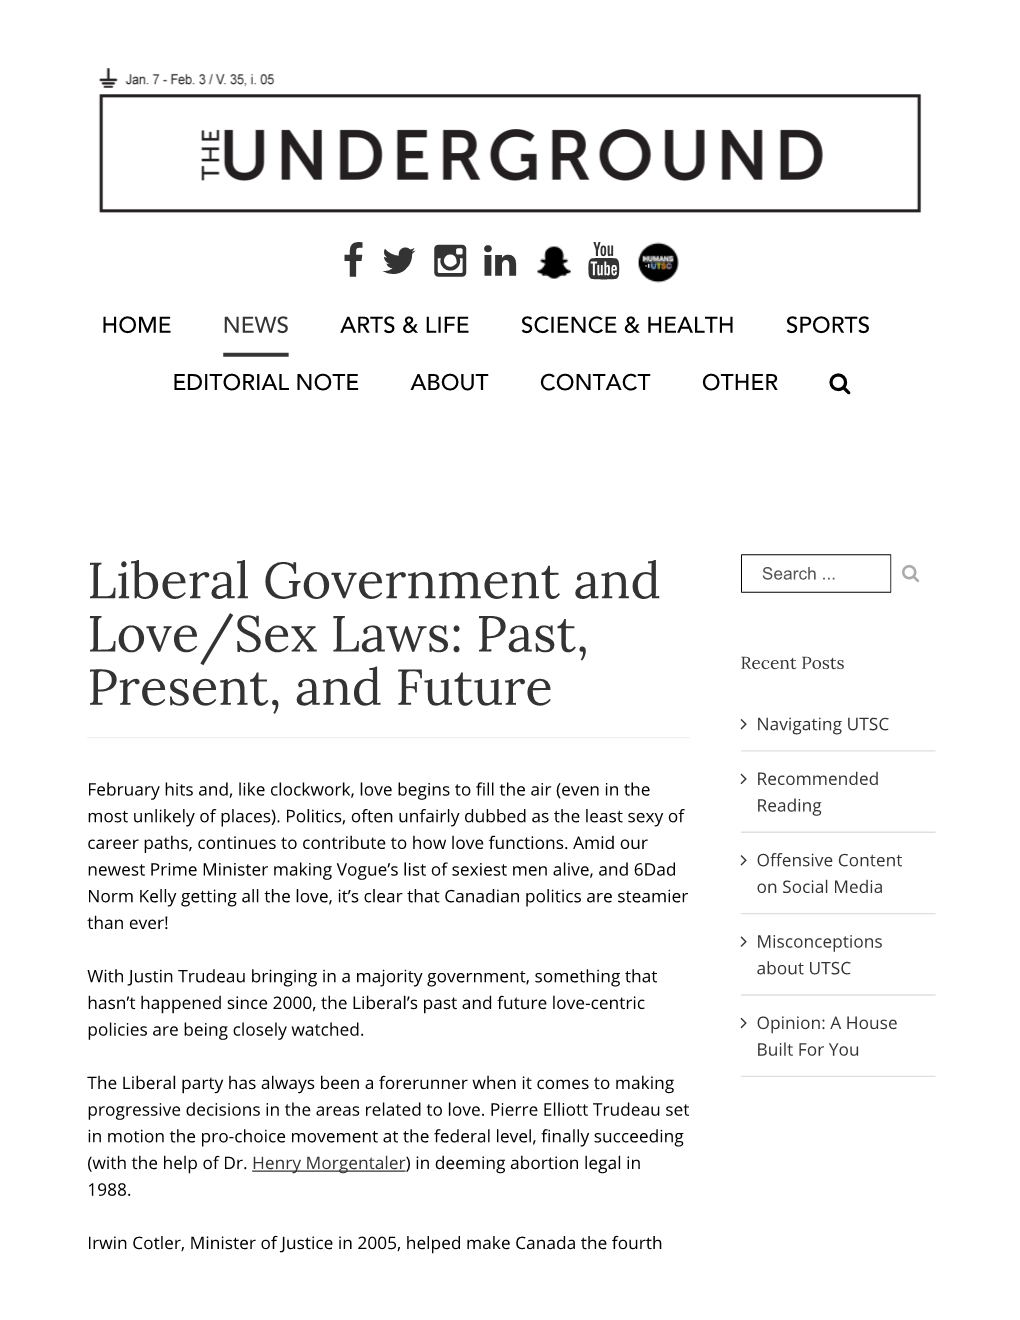 Liberal Government and Love/Sex Laws: Past